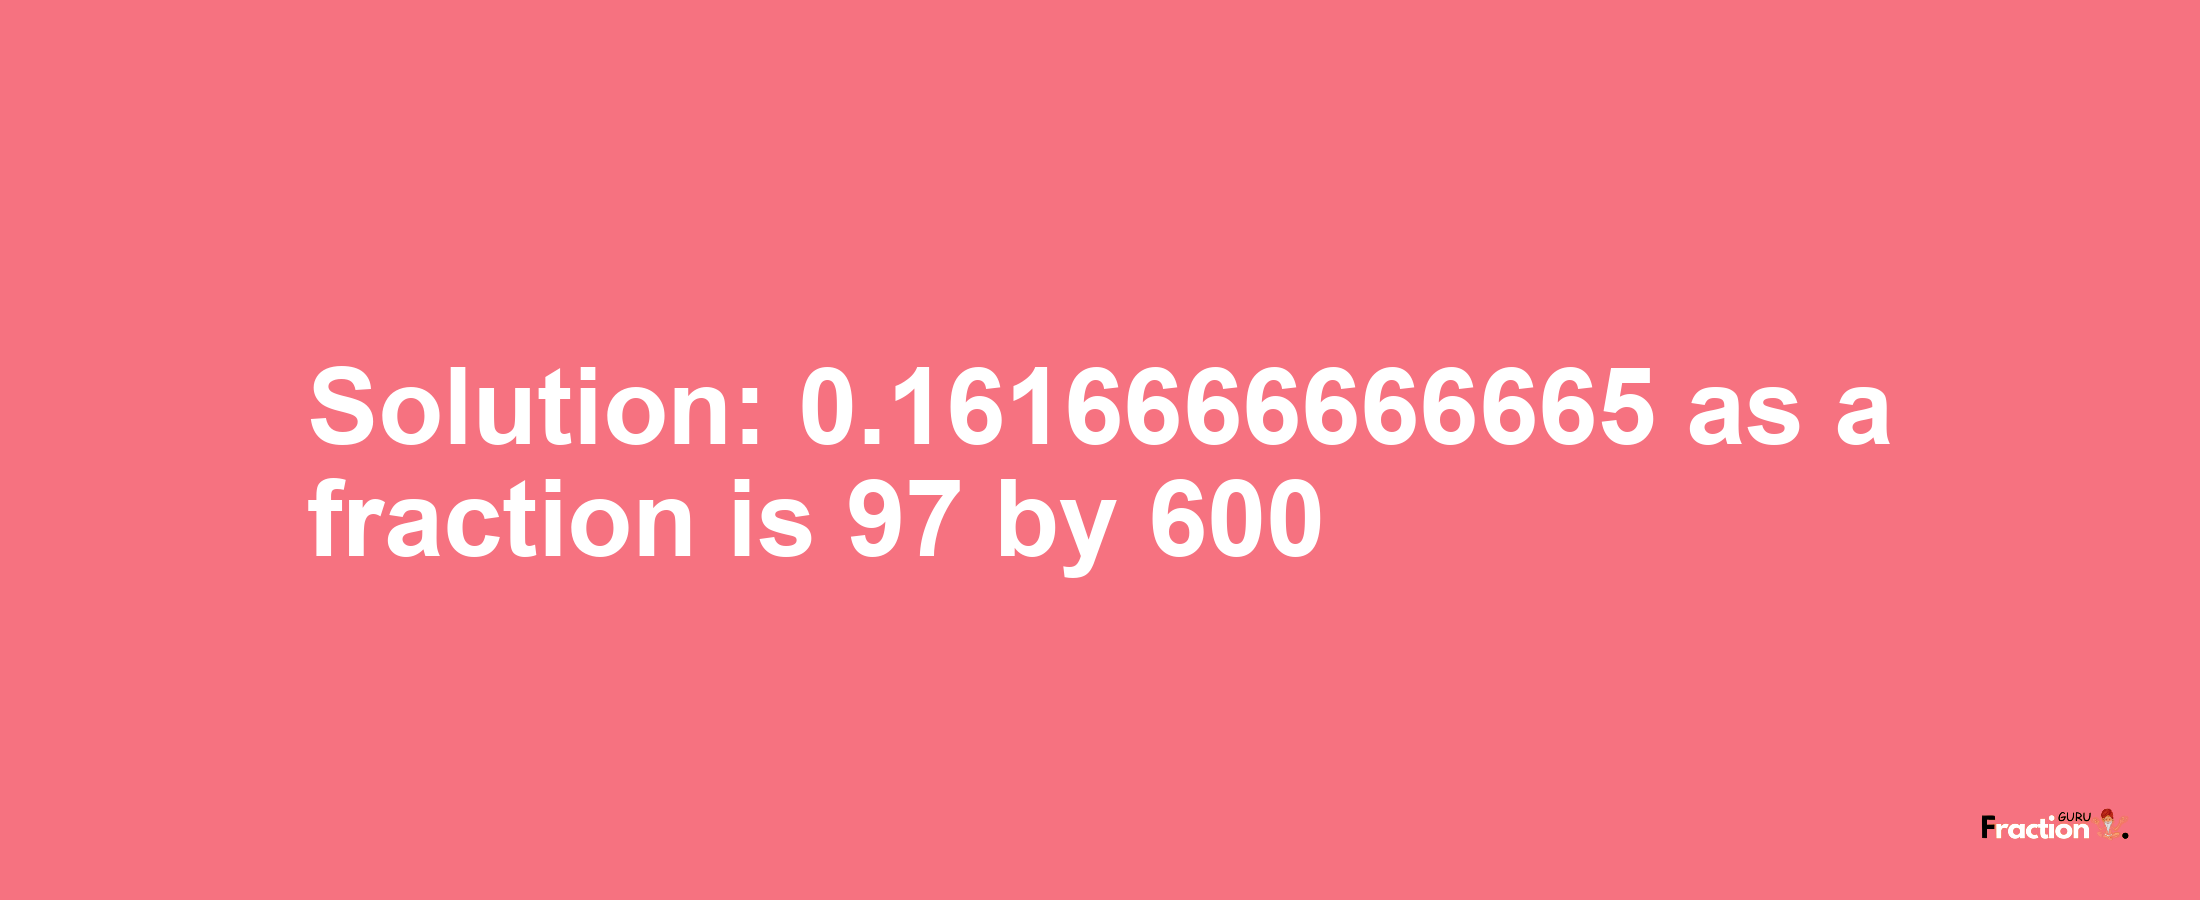 Solution:0.1616666666665 as a fraction is 97/600